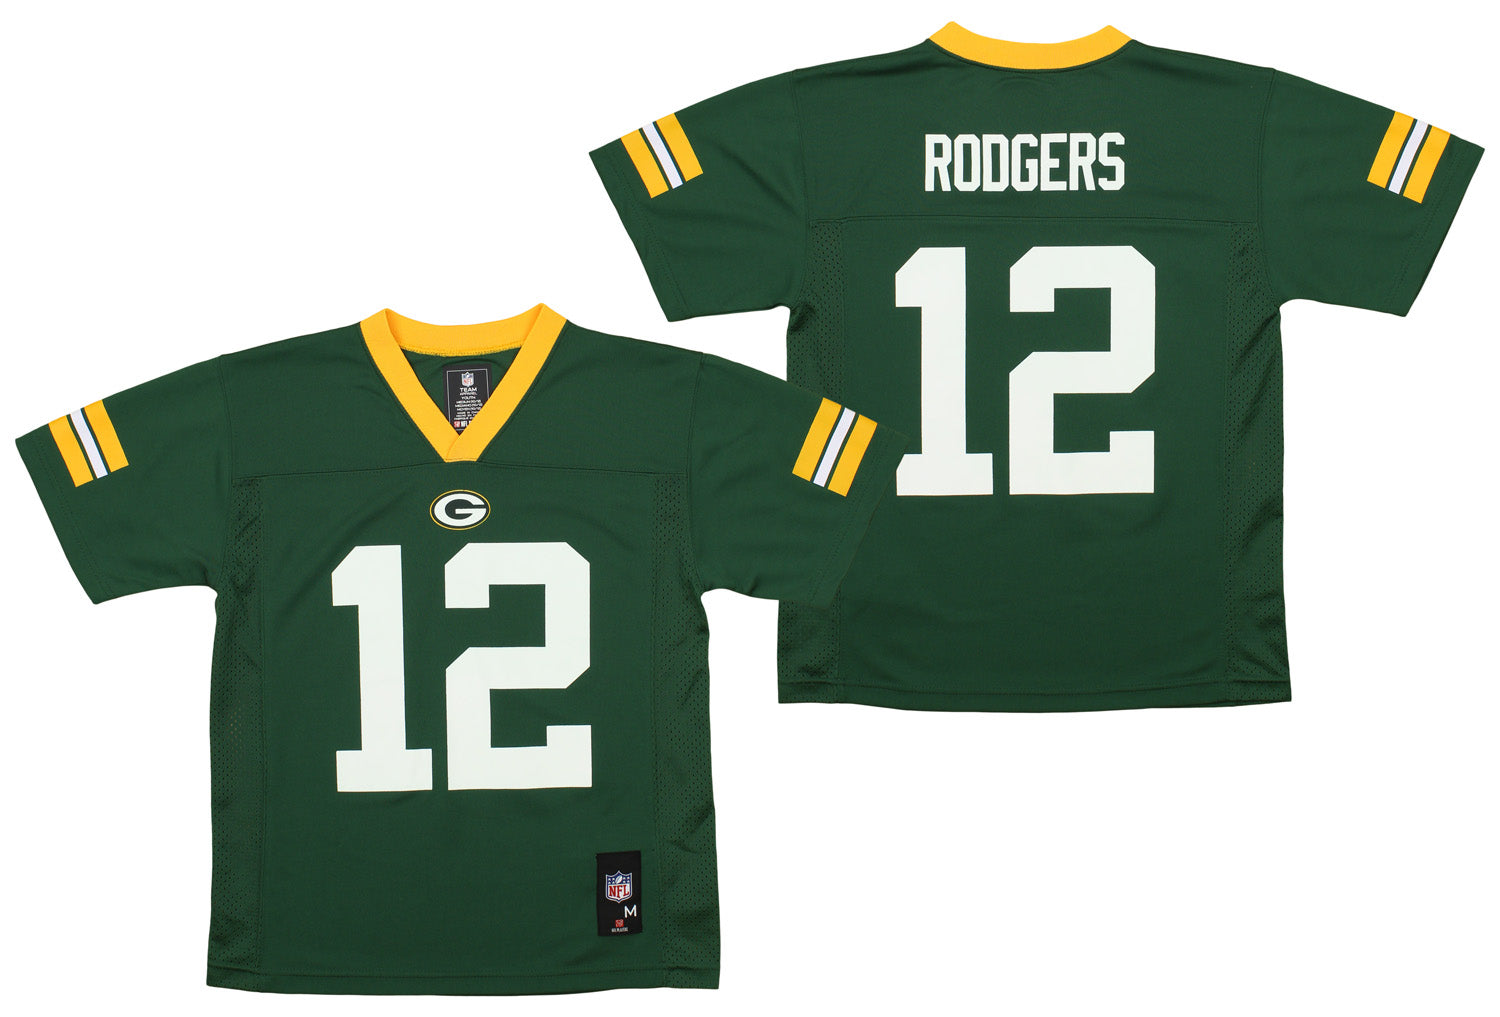 boys green bay packers jersey